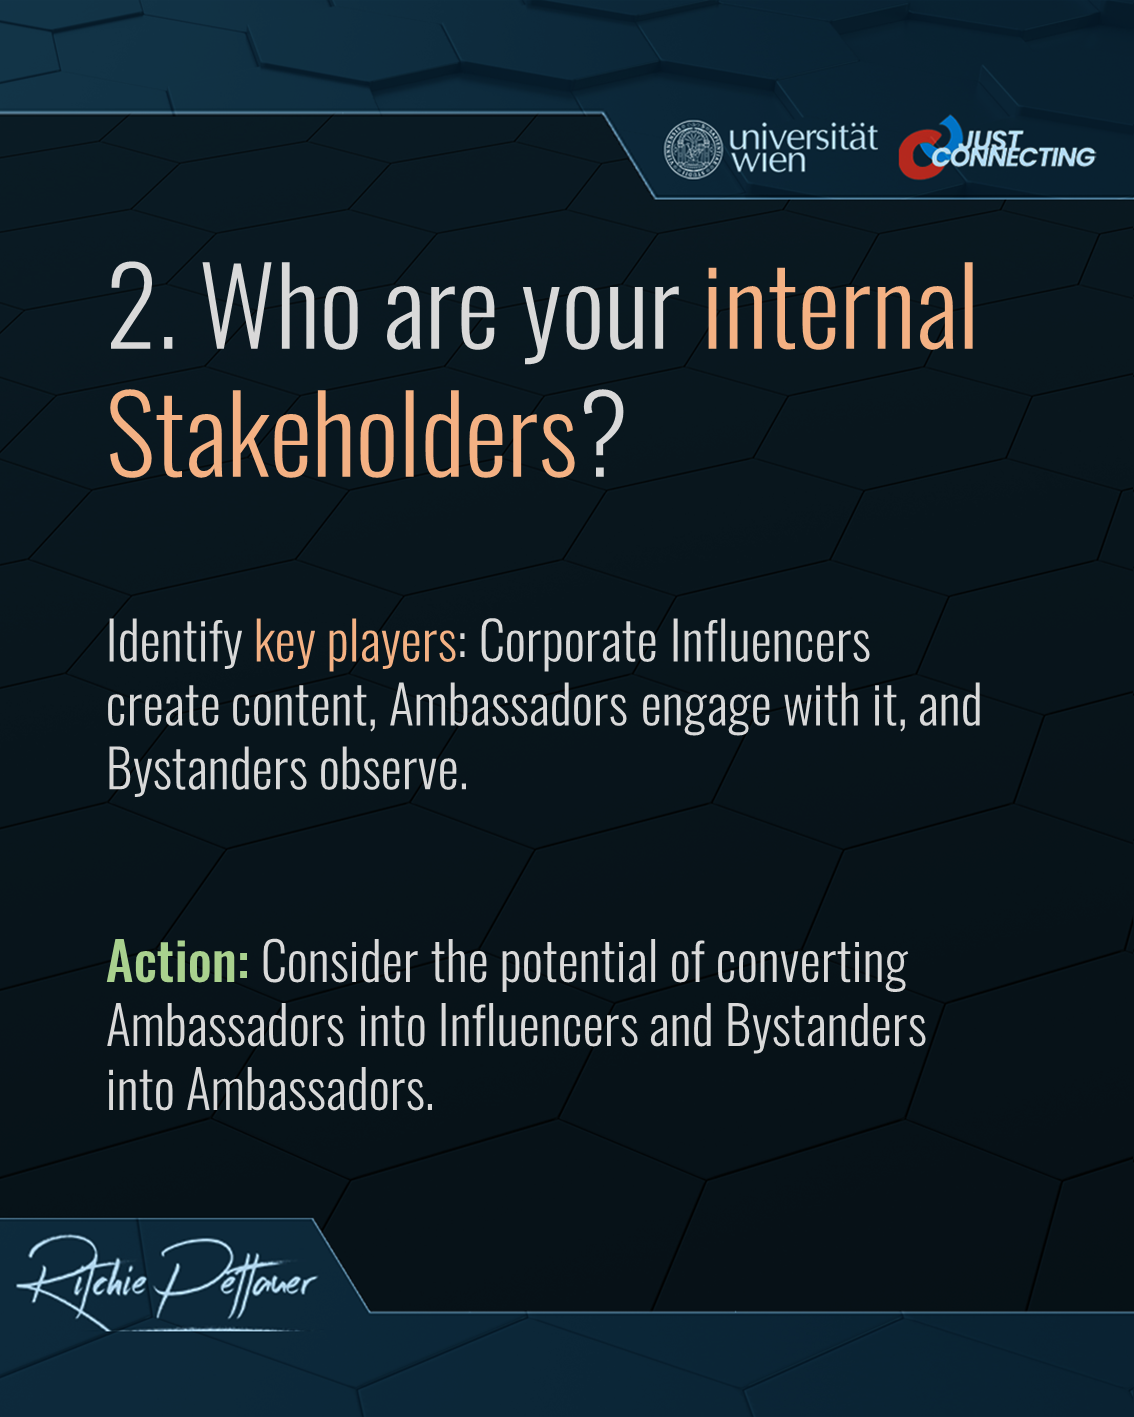 Corporate Influencer Programs: A Strategic Guide for Marketing Leaders